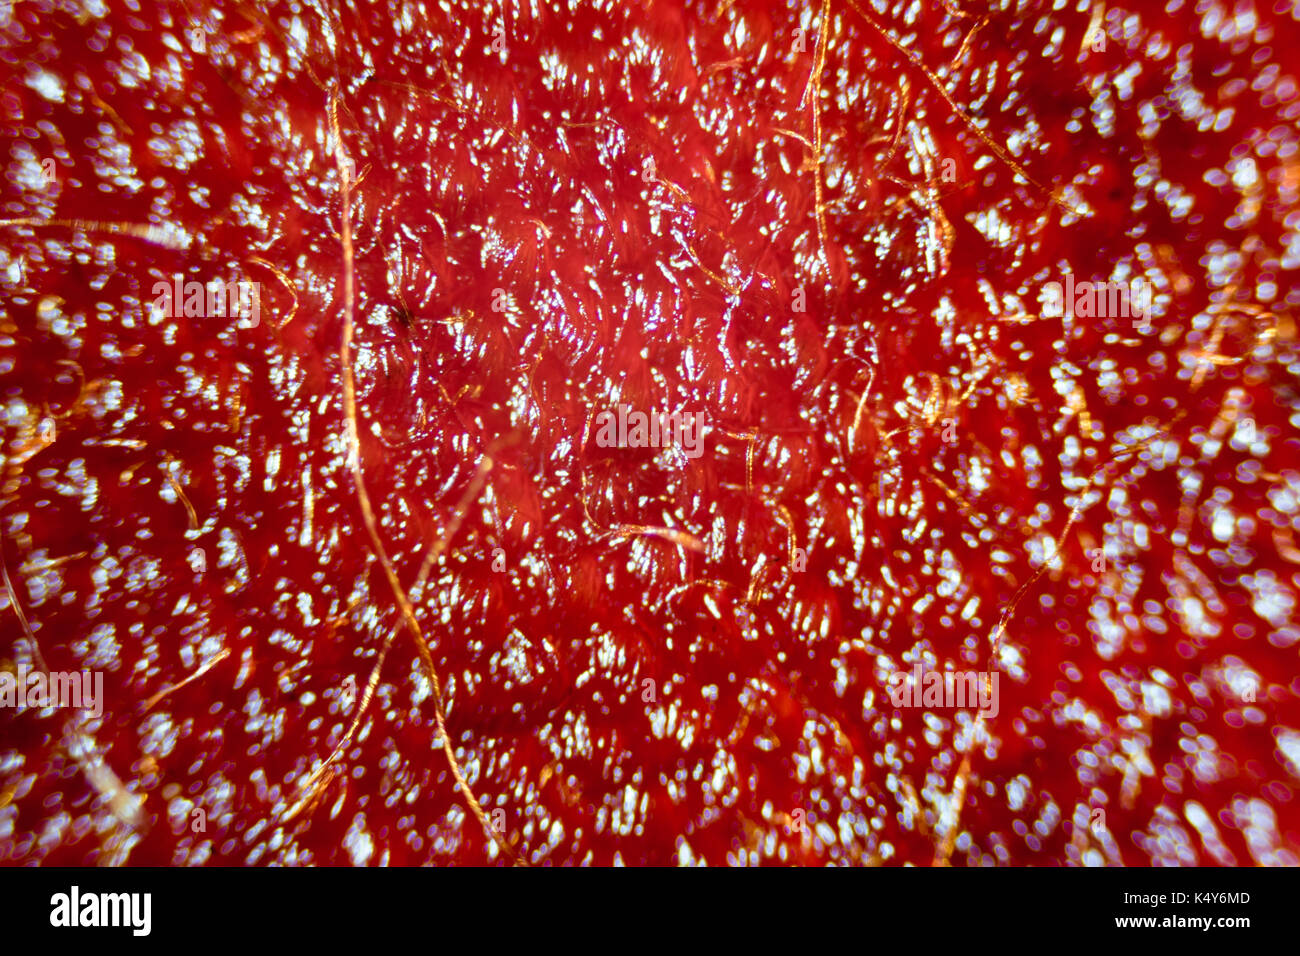 Microscope image of violet flower petal cells Stock Photo